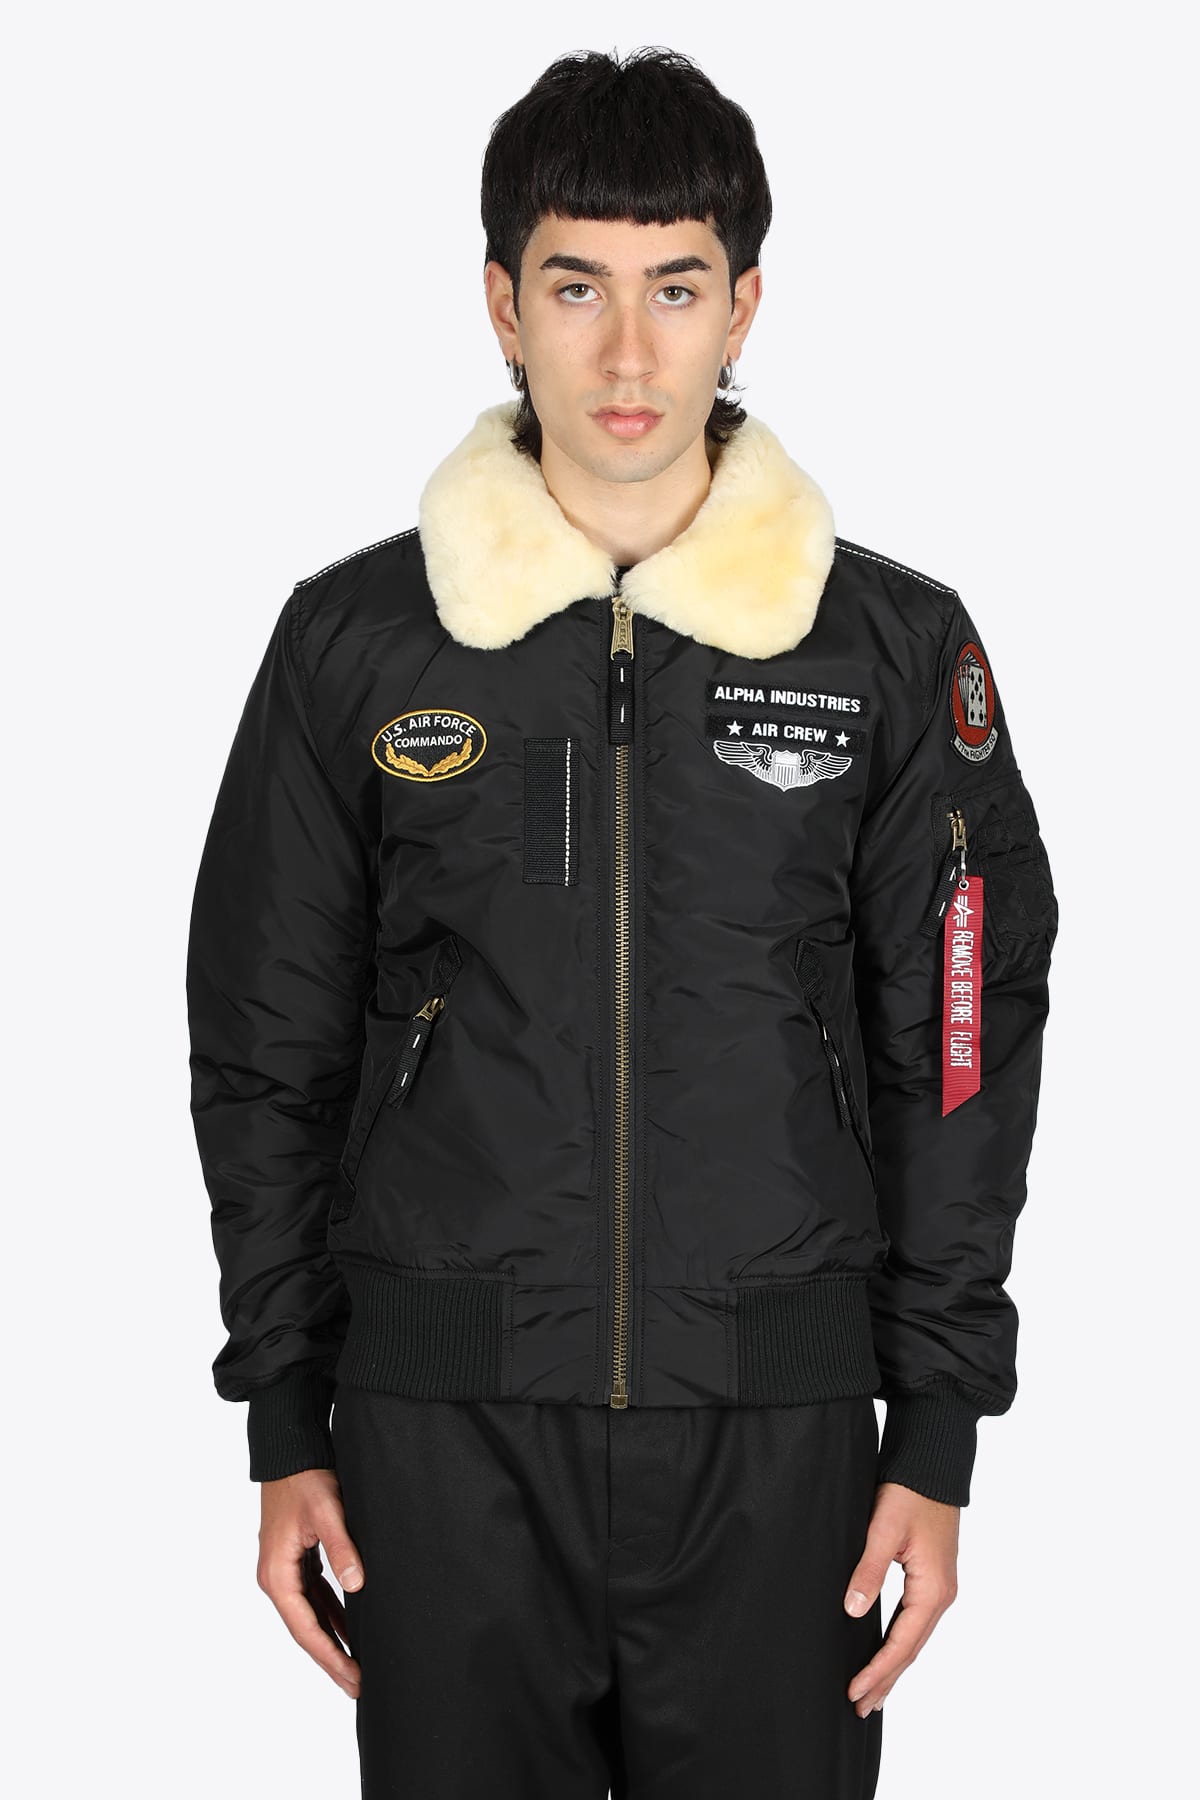 Alpha Industries Injector Iii Air Force Black nylon Bomber jacket with faux fur collar - INJECTOR III AIR FORCE